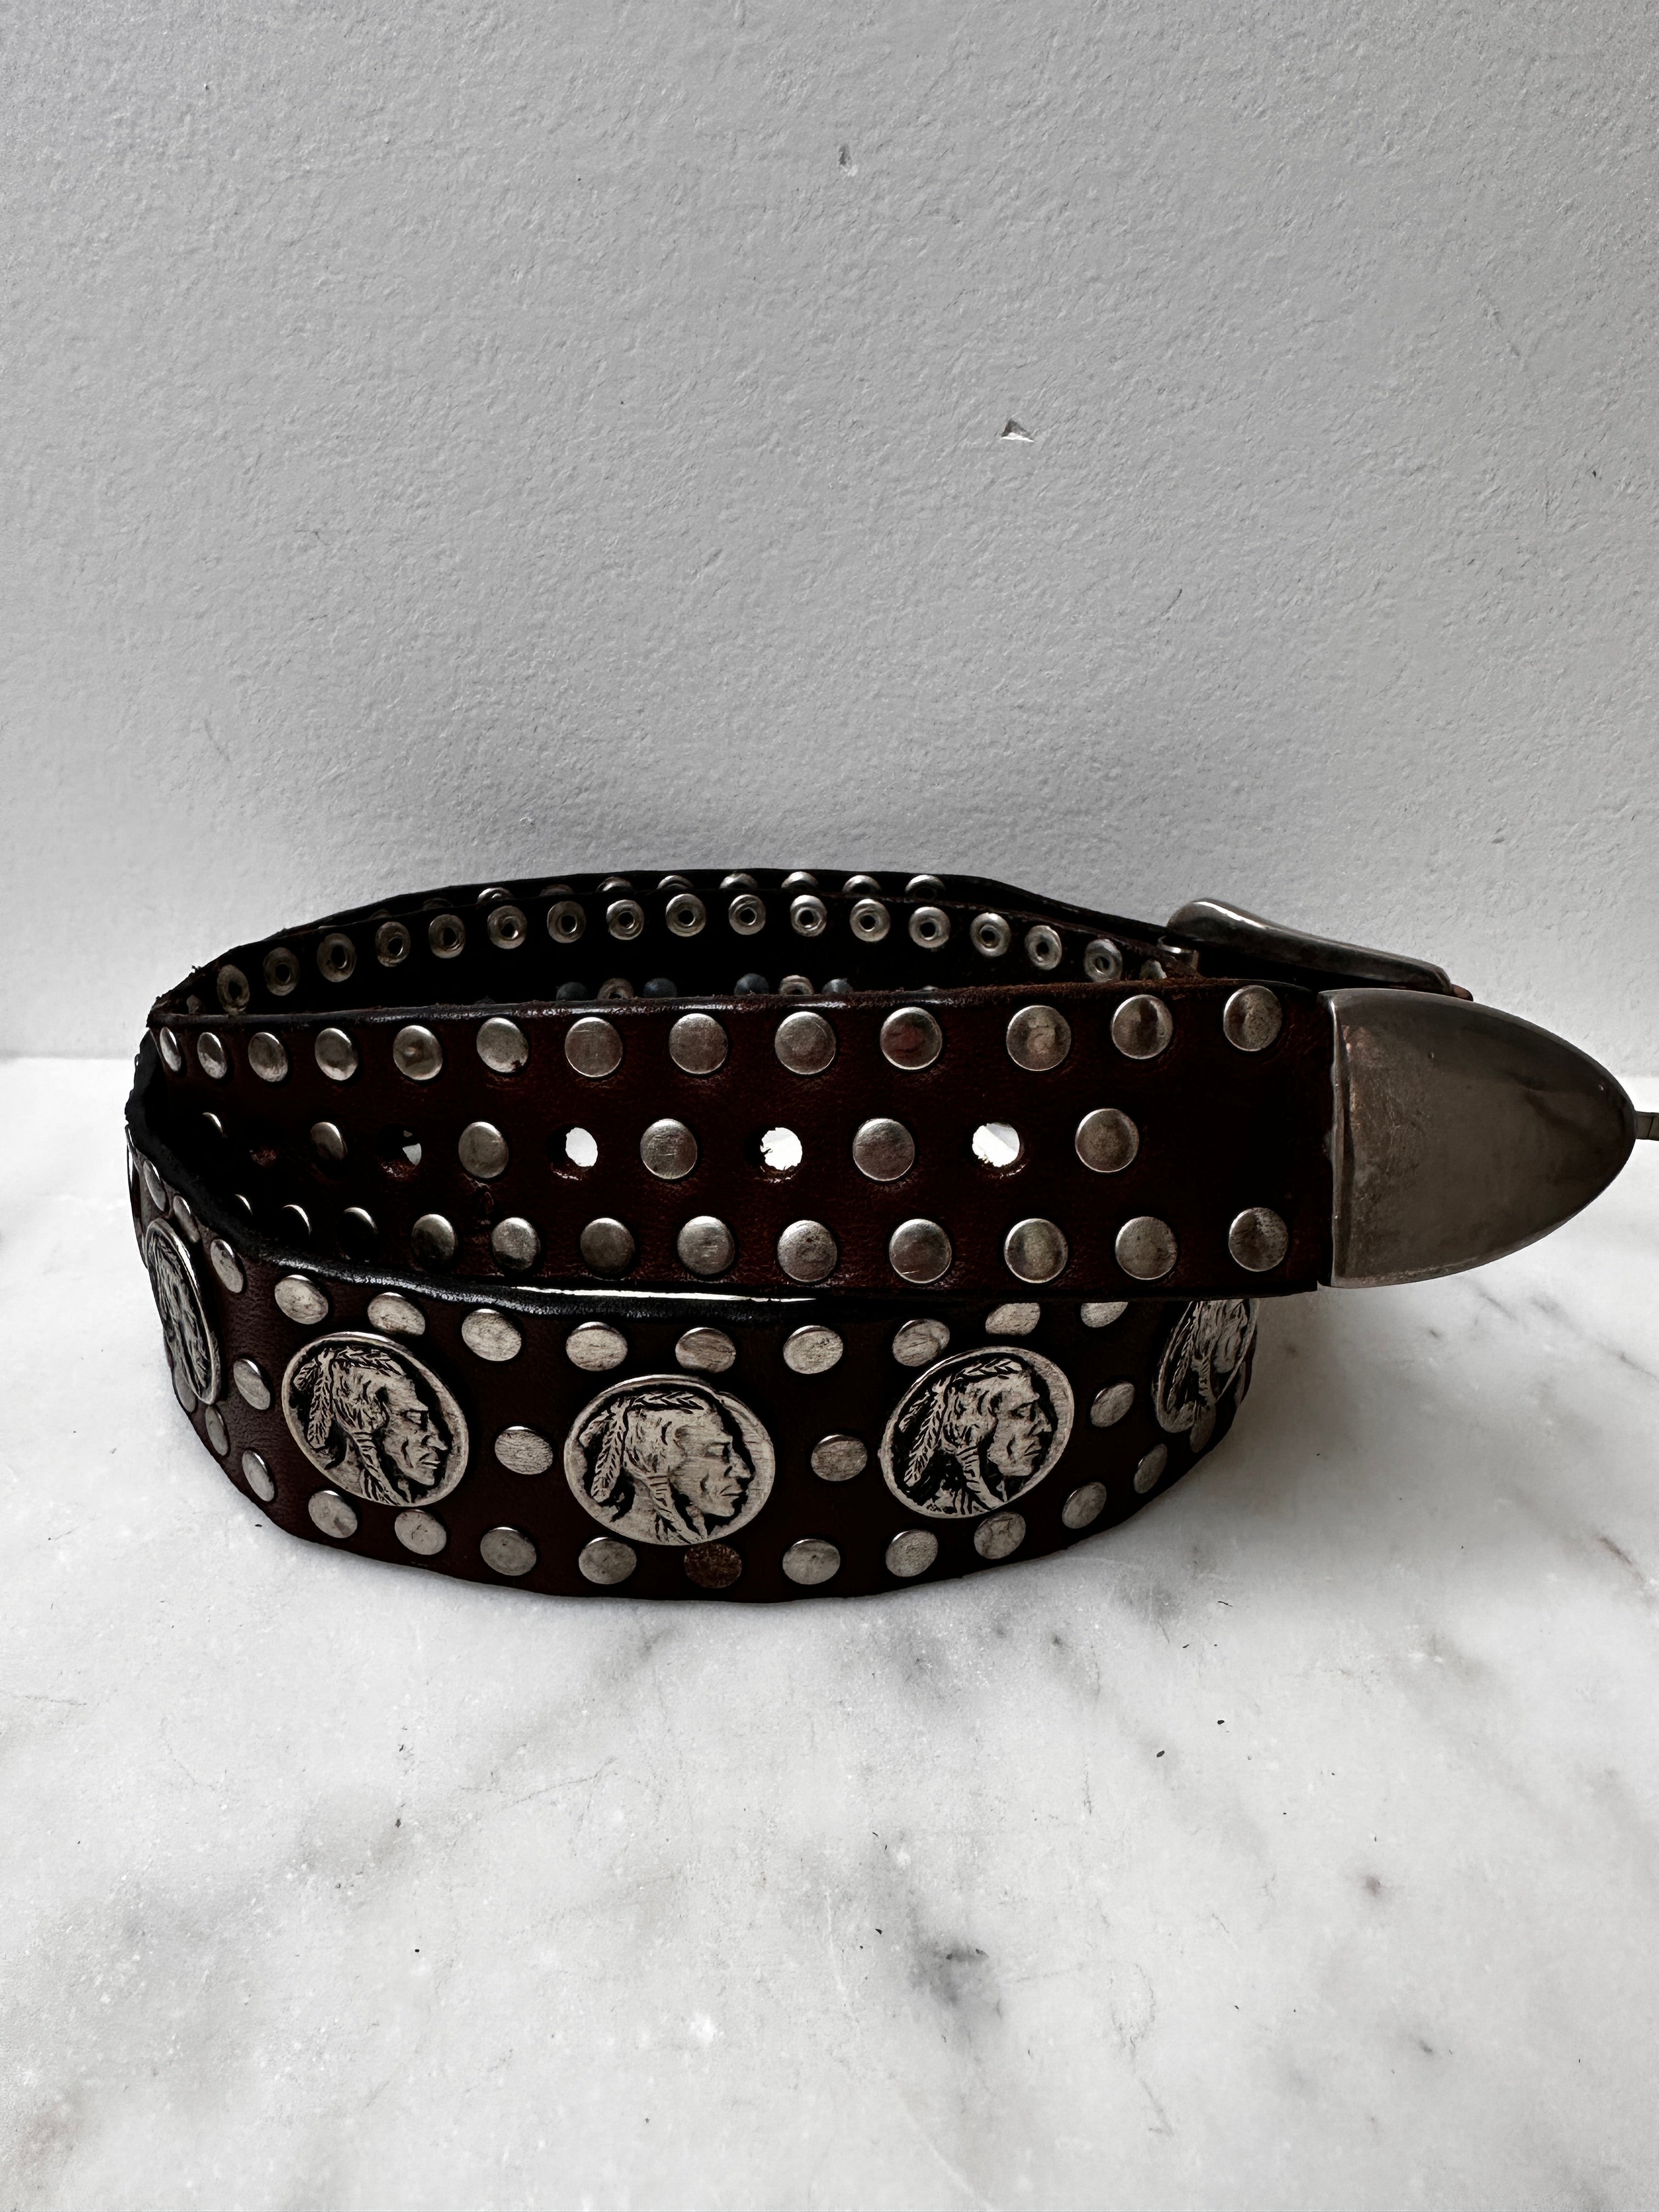 Future Nomads Belts 86cm Brown and Silver Indian Faces Belt